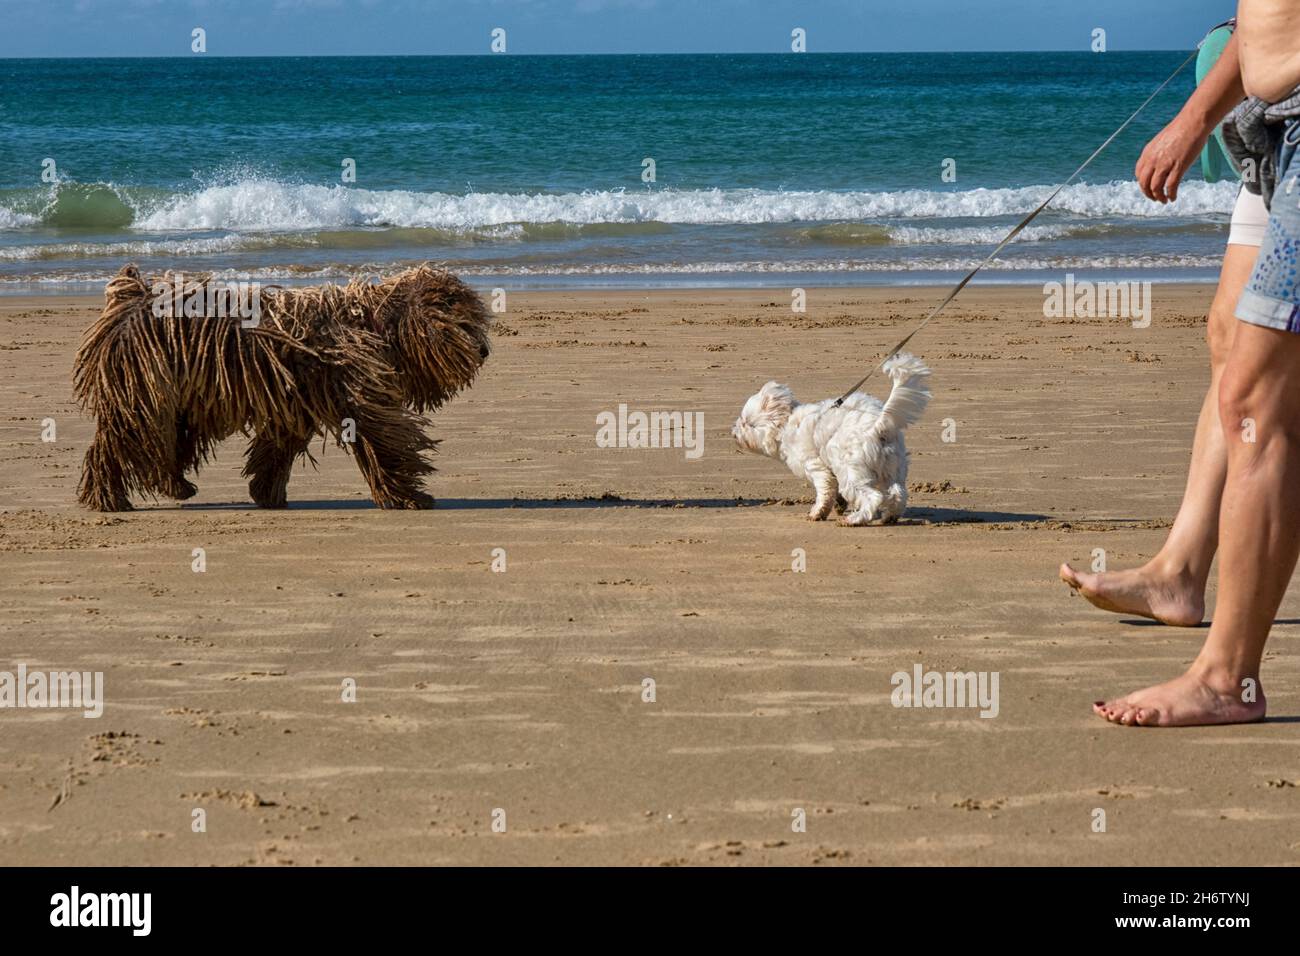 Large Komondor Hungarian sheepdog and small white terrier meet each other on the beach in Spain Stock Photo